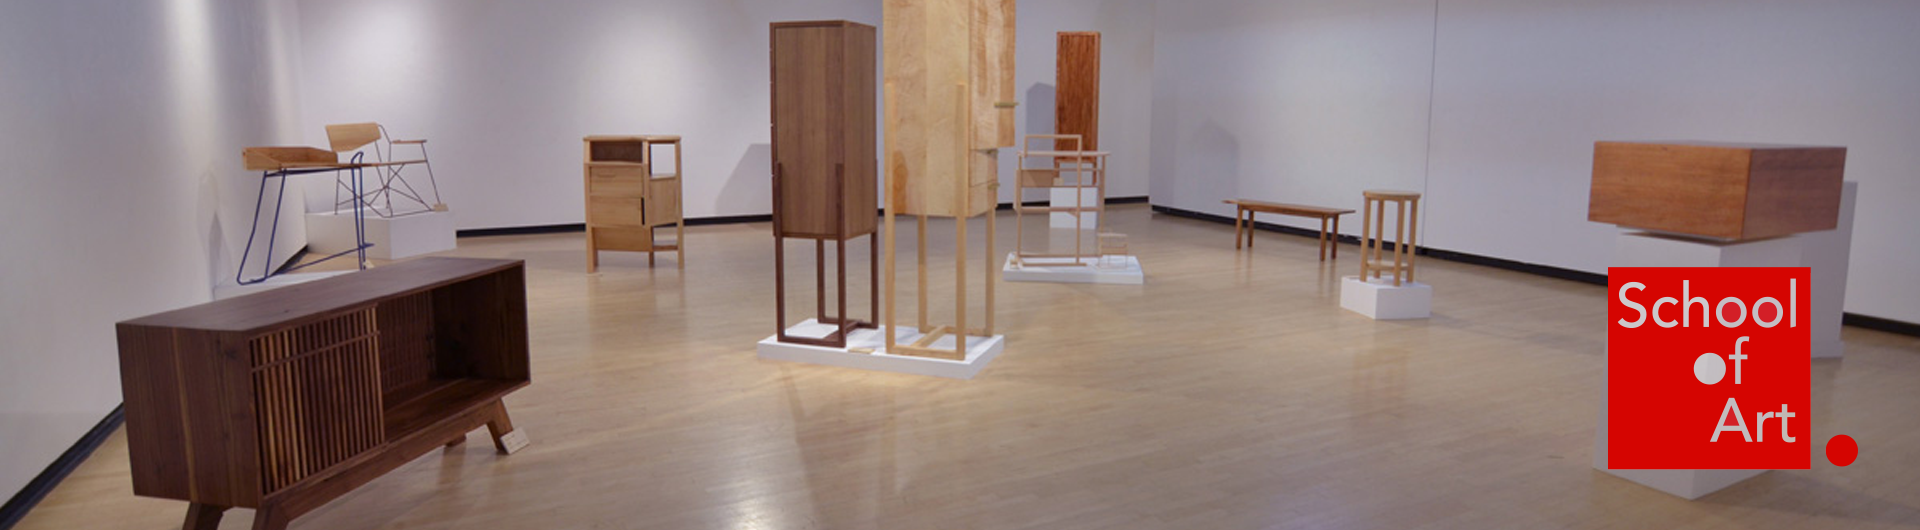 Student wood projects, including cabinets, tables and chairs, arranged in a gallery exhibit